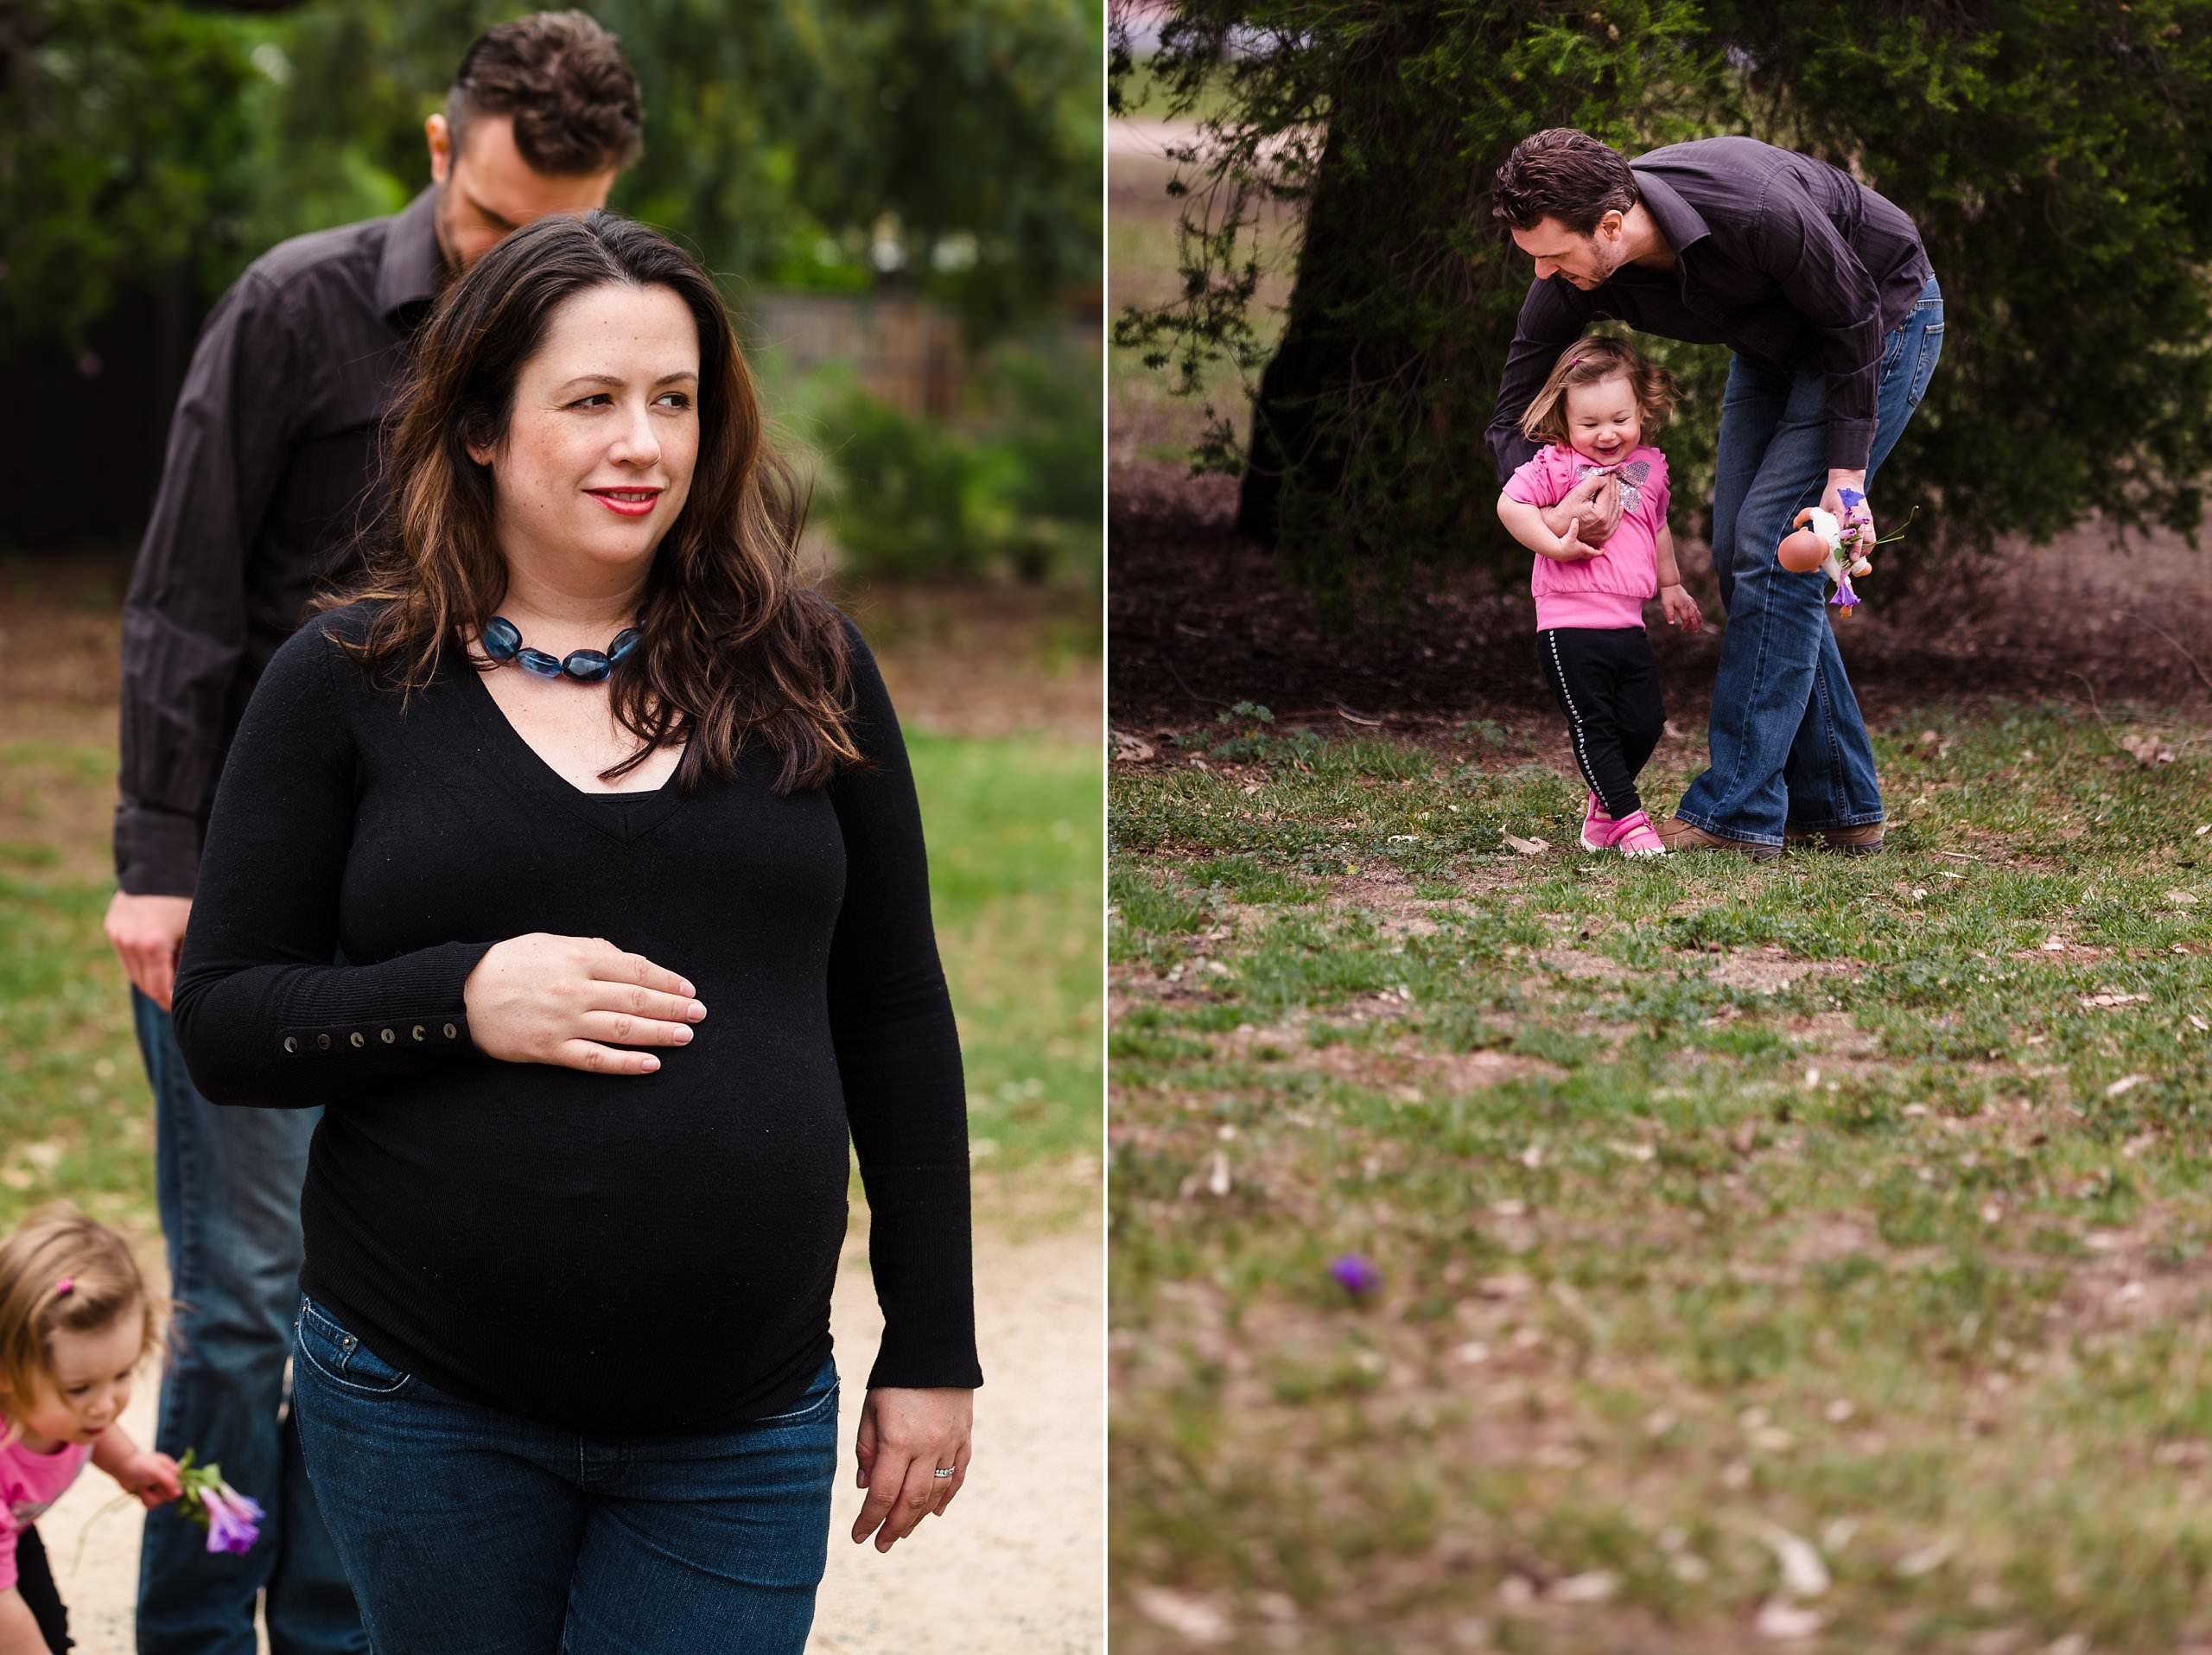 brighton maternity photographer takes photographs of family in local park